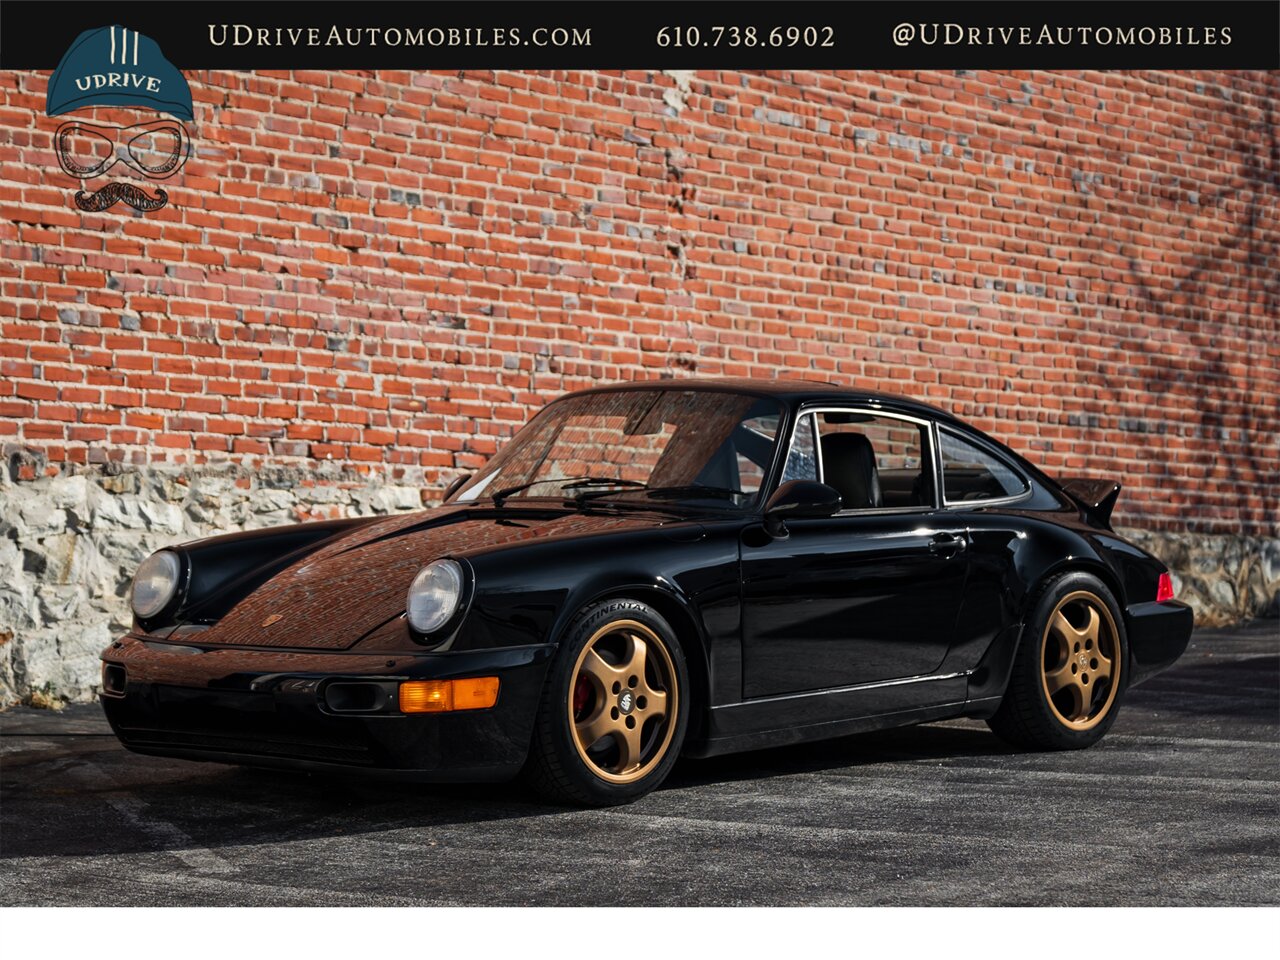 1989 Porsche 911 C4  964 Carrera 4 C4 5 Speed Manual $33k in Recent Service History - Photo 7 - West Chester, PA 19382